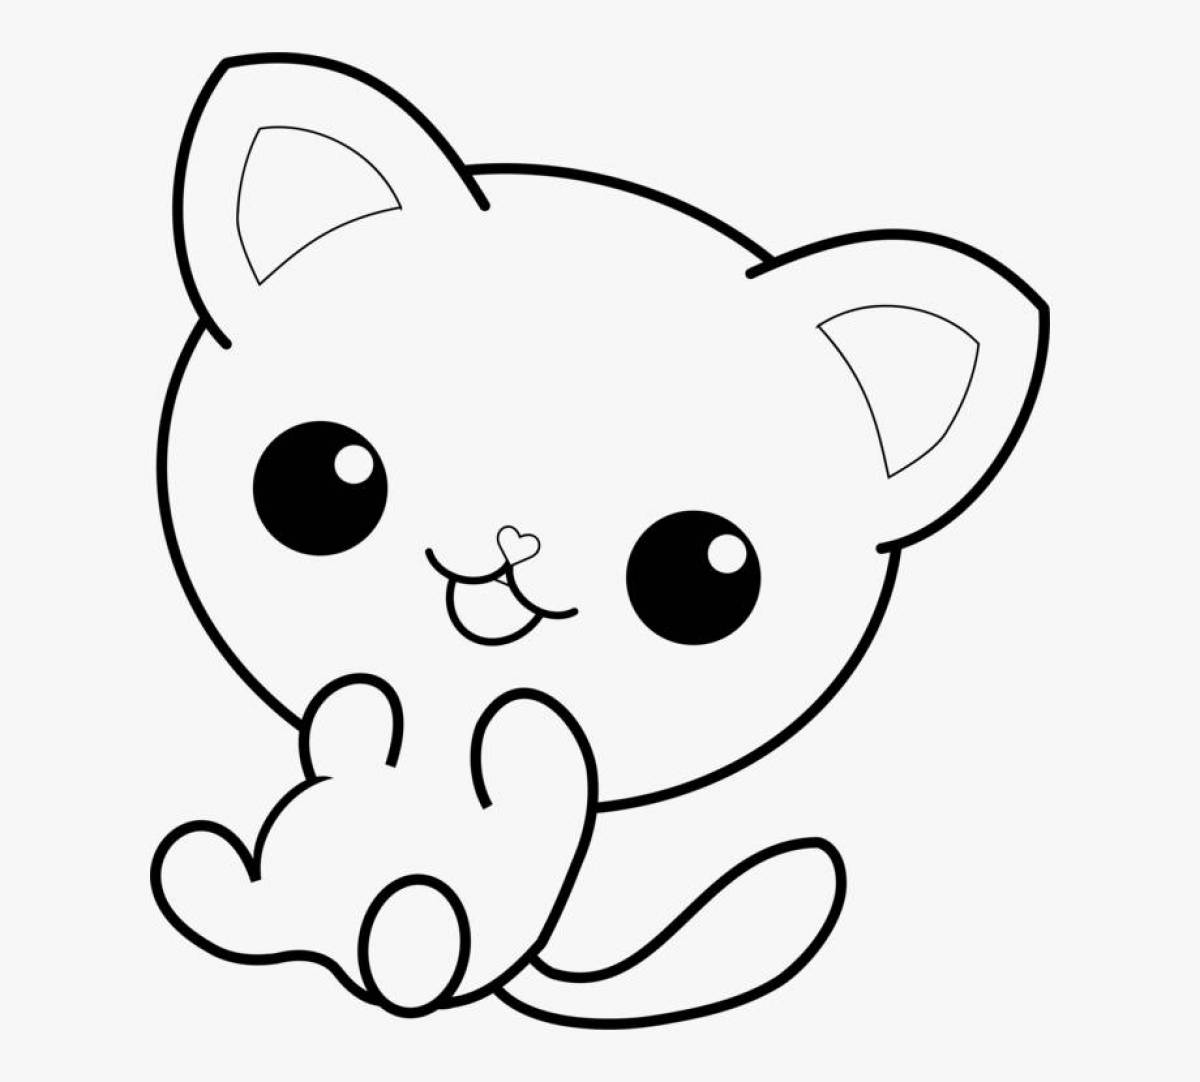 Exotic cats coloring pages for kids